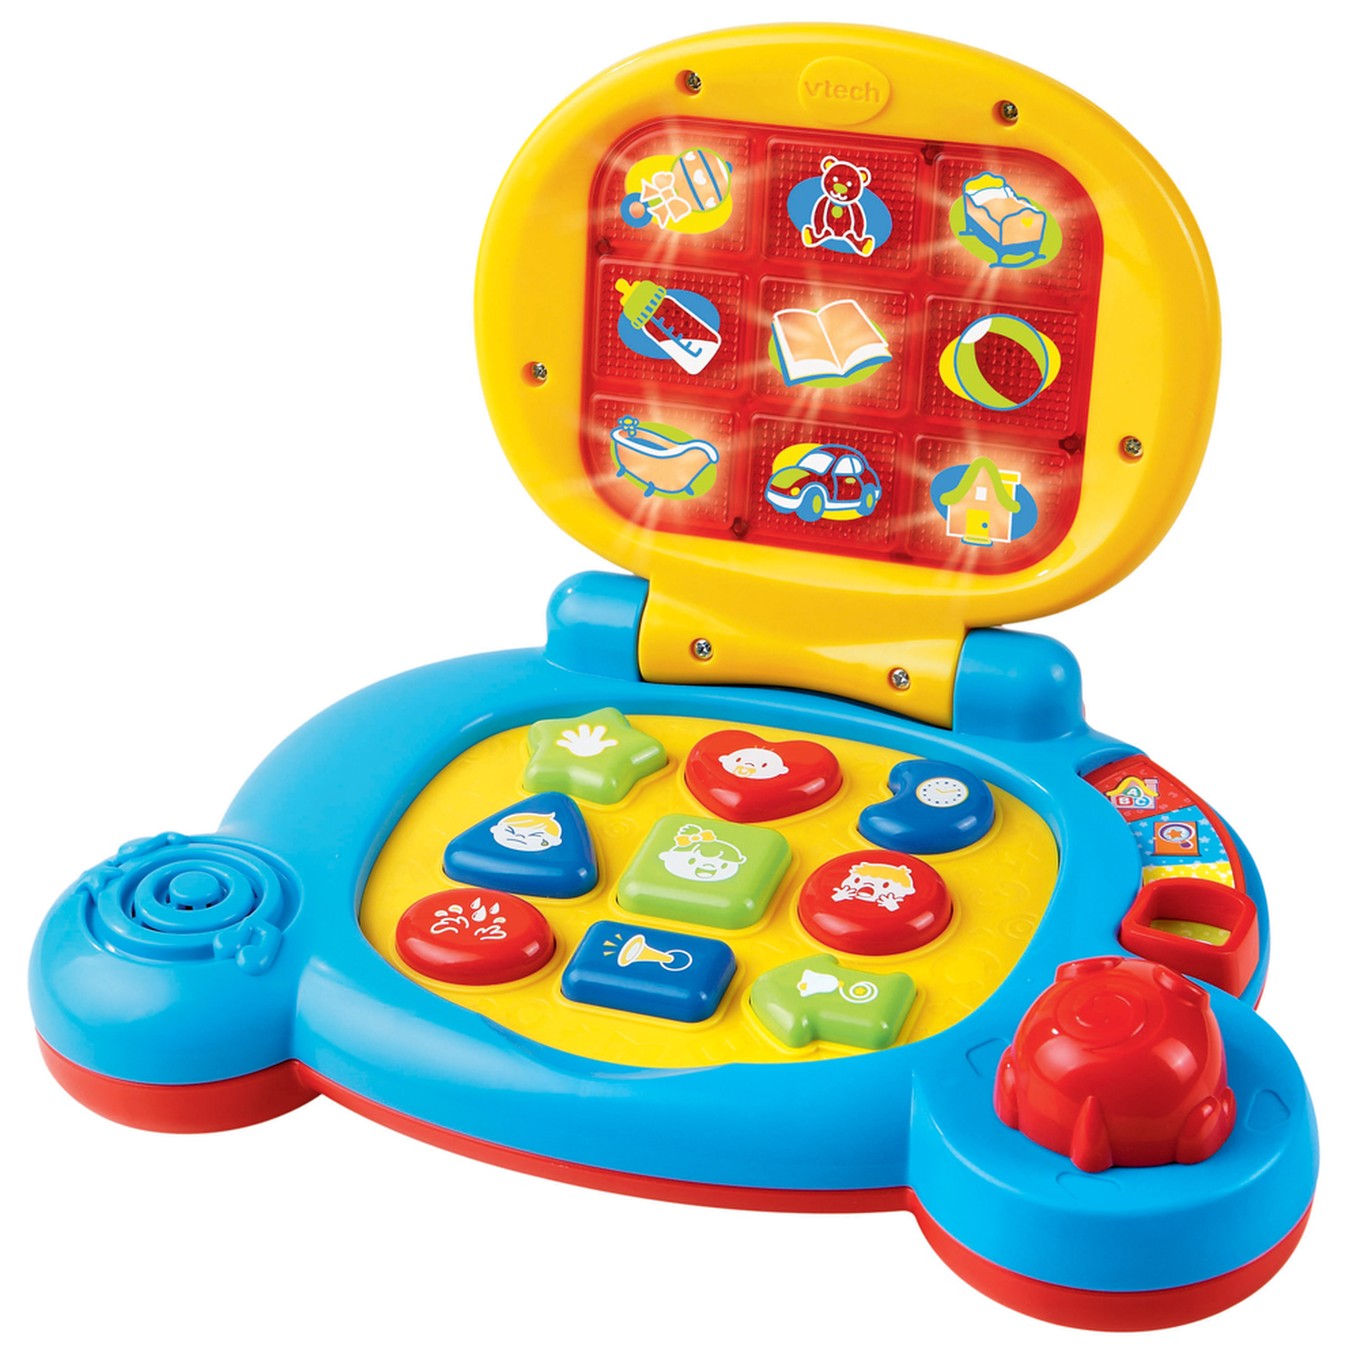 vtech computer for 6 year old